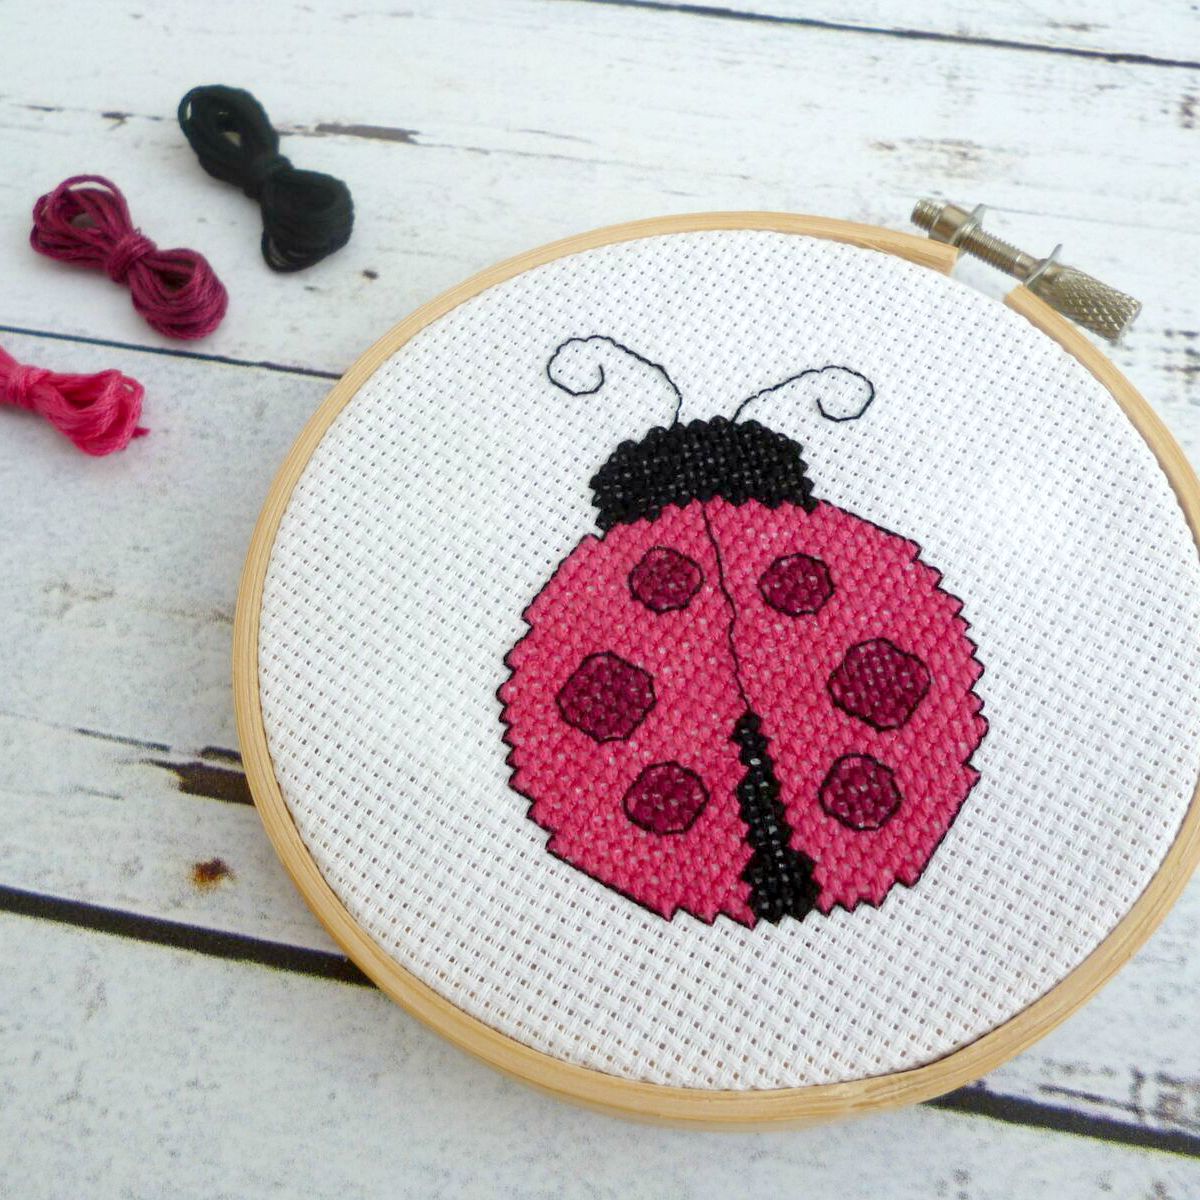 Learning to cross stitch [Part 1]